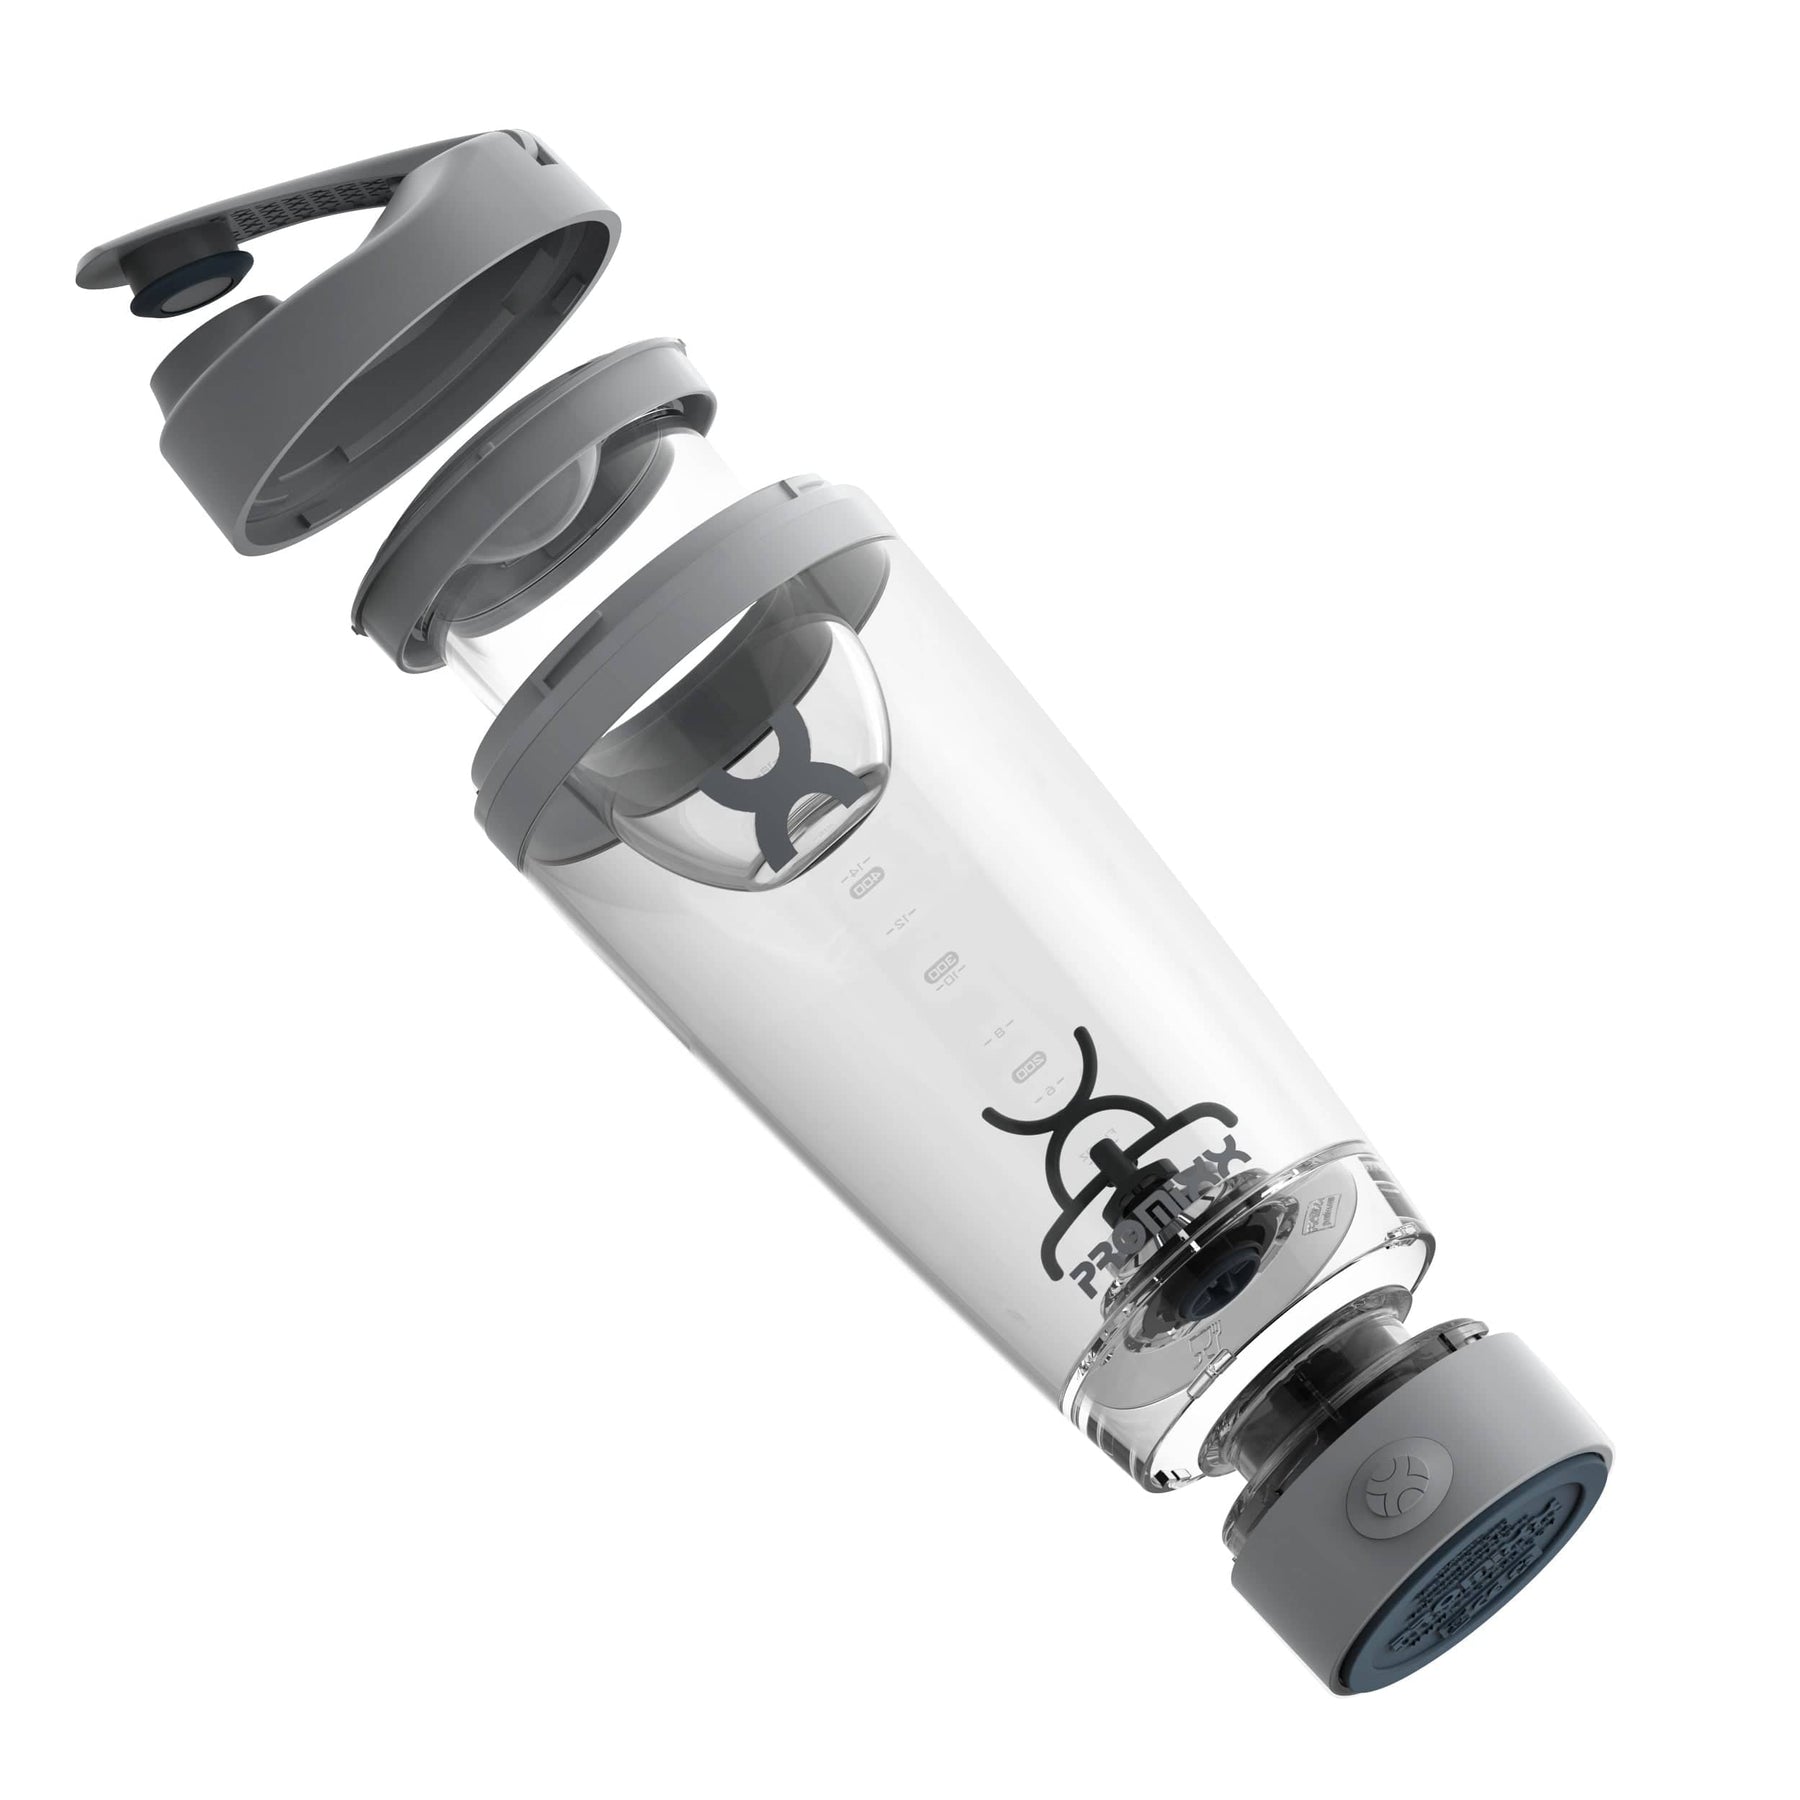 Promixx Pro Shaker Bottle | Rechargeable, Powerful for Smooth Protein Shakes | Includes Supplement Storage - BPA Free | 20oz Cup (Silver White/Gray)